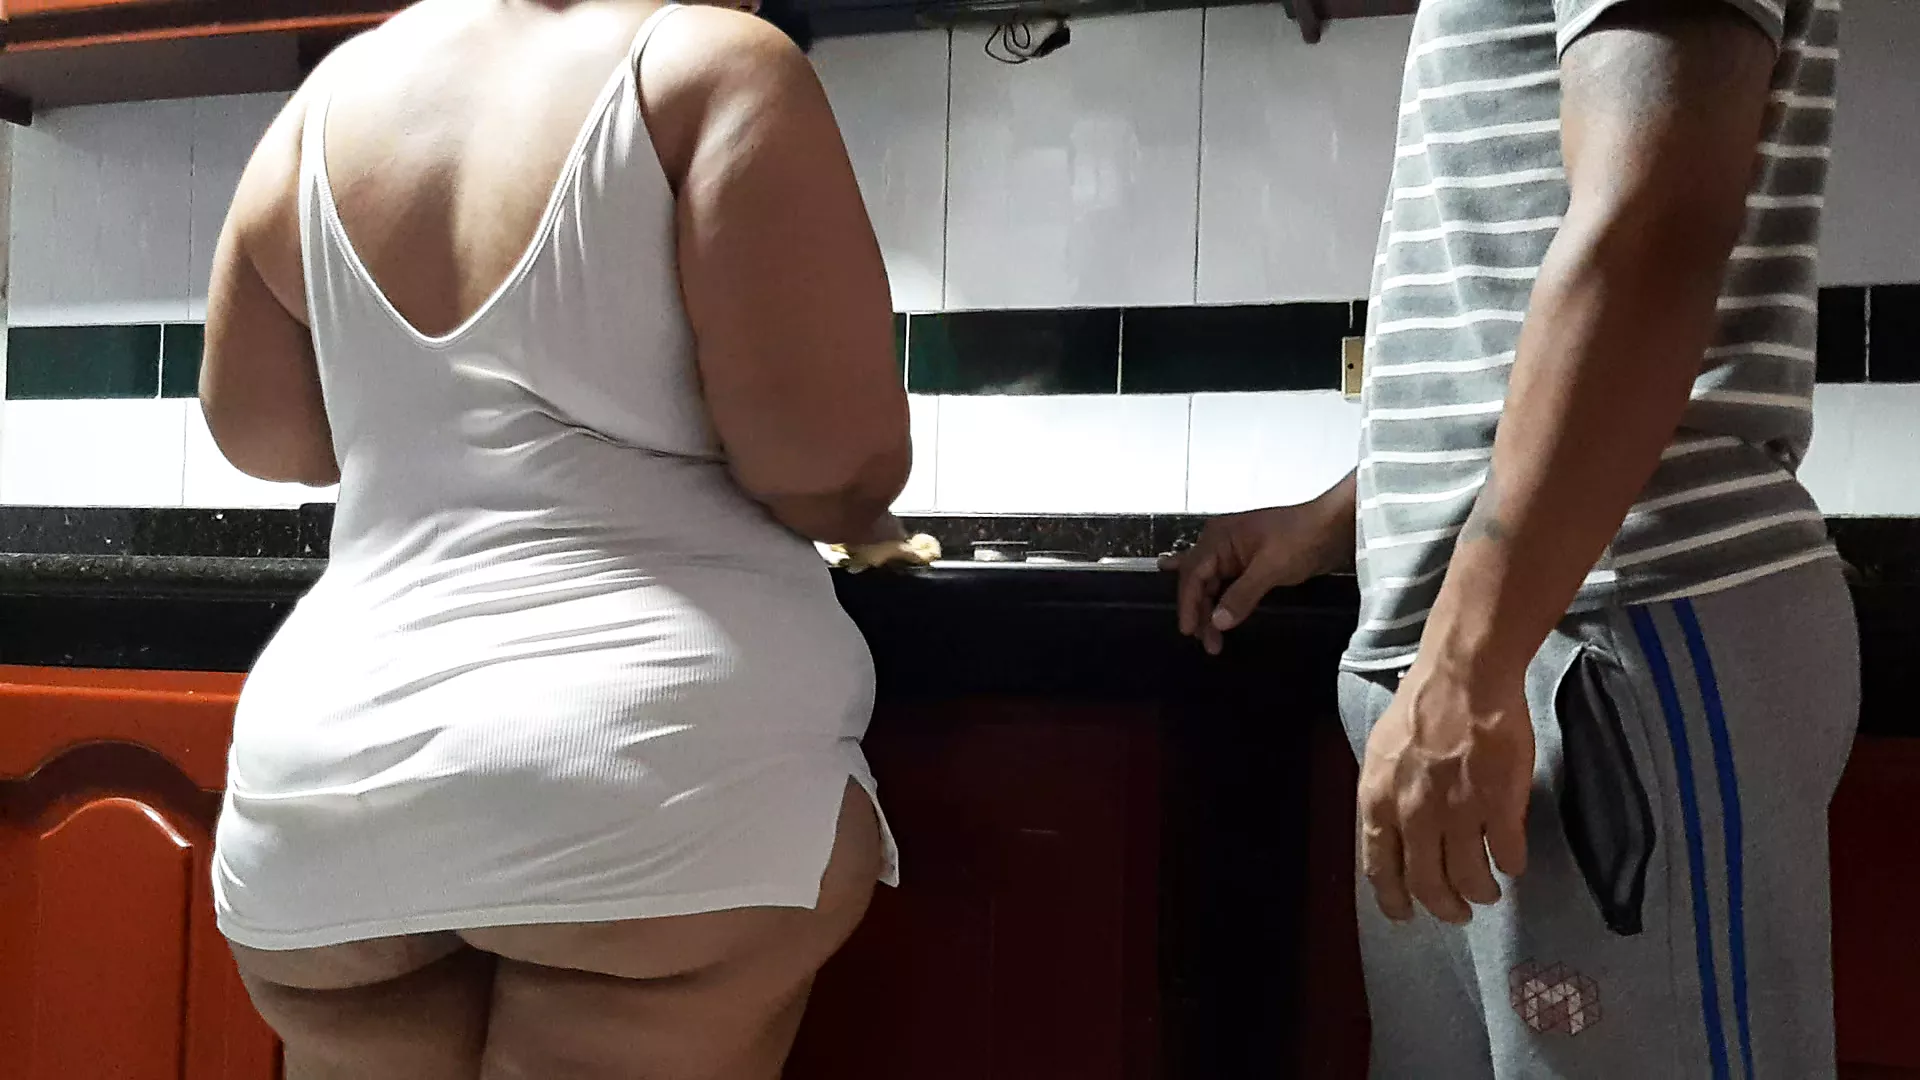 I found my best friends mom pantyless in the kitchen